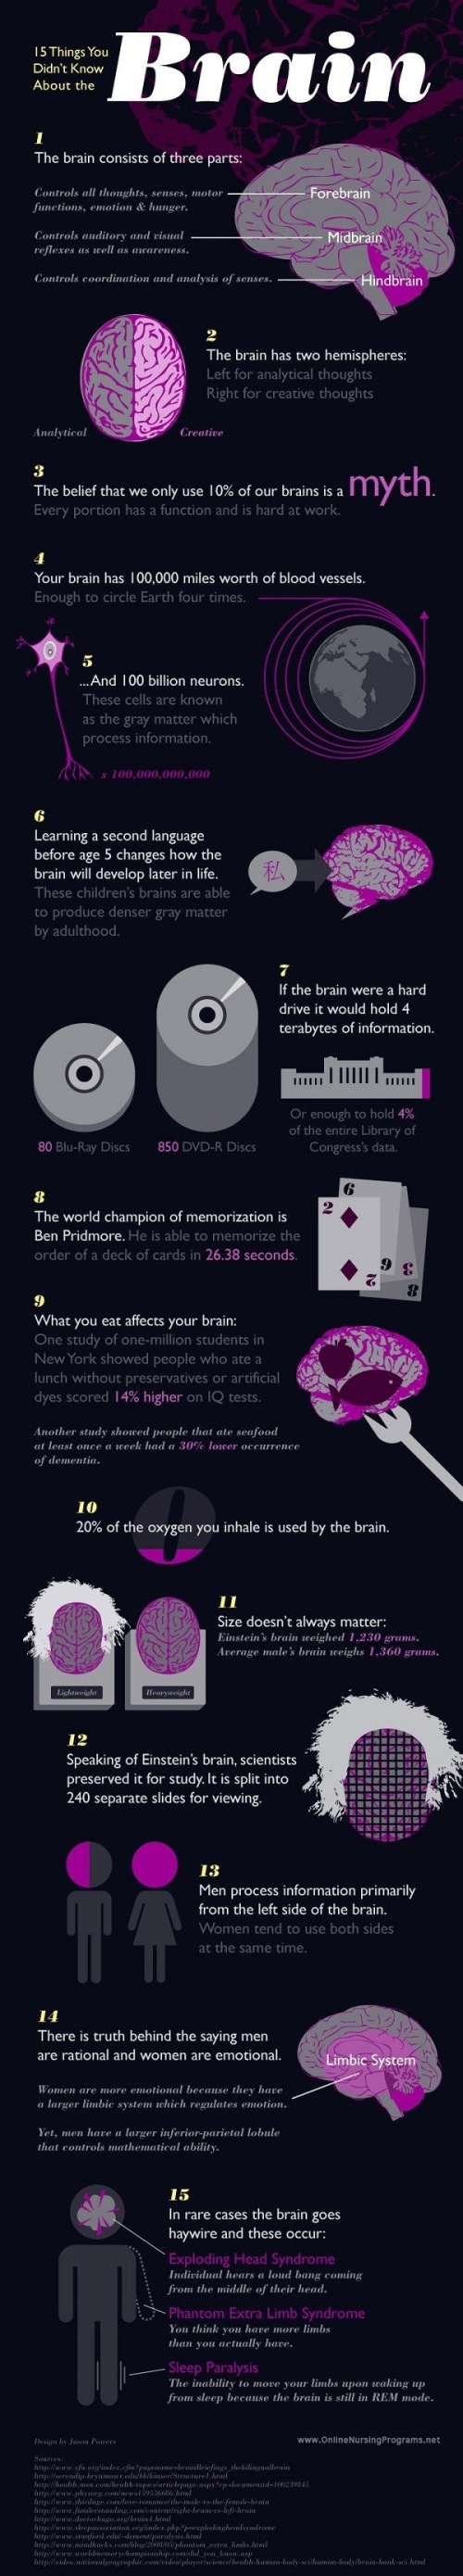 15-Interesting-Fact-About-The-Brain